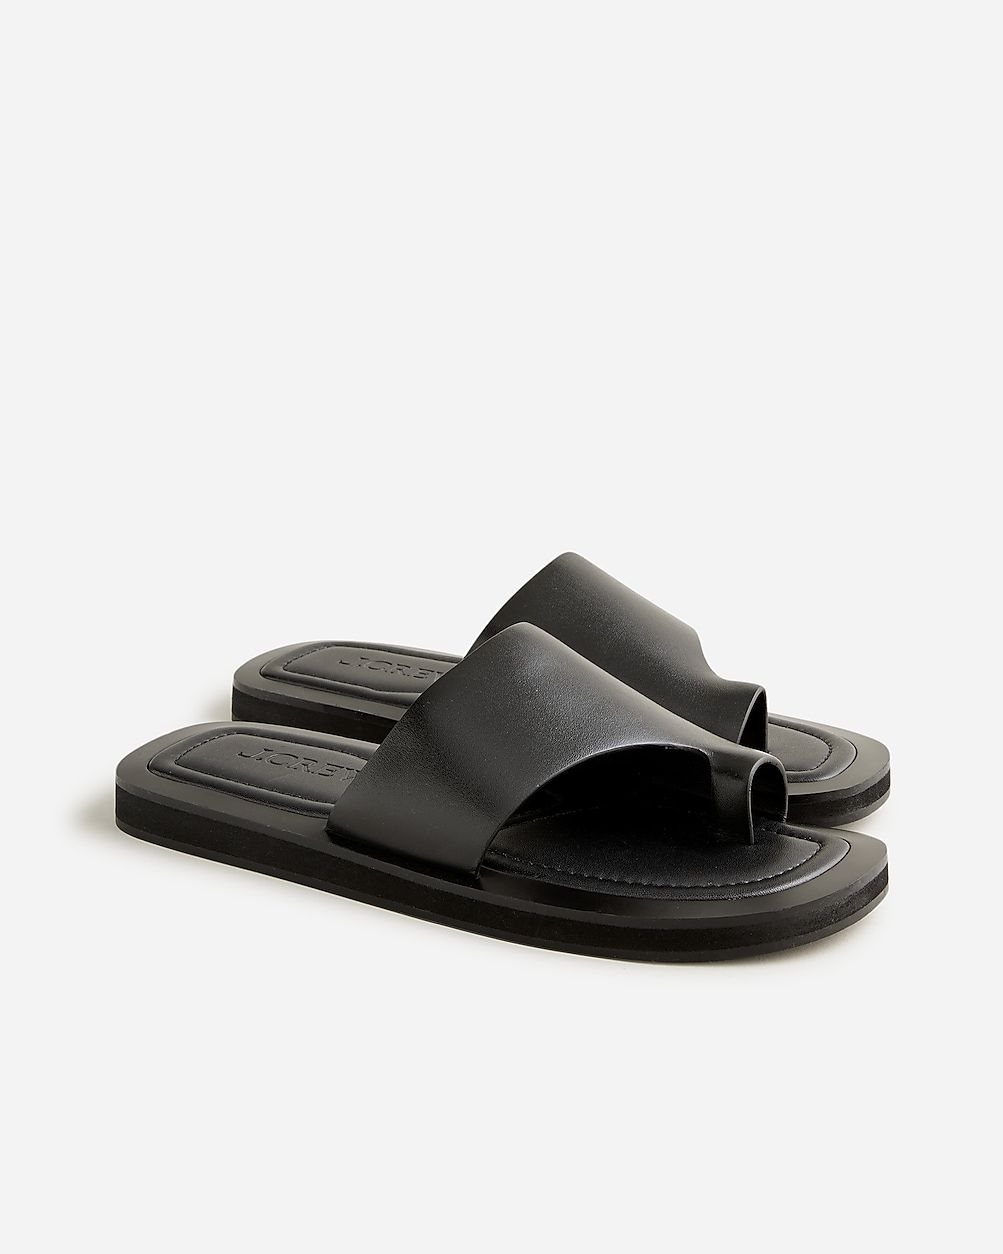 Toe-ring slide sandals in leather | J.Crew US